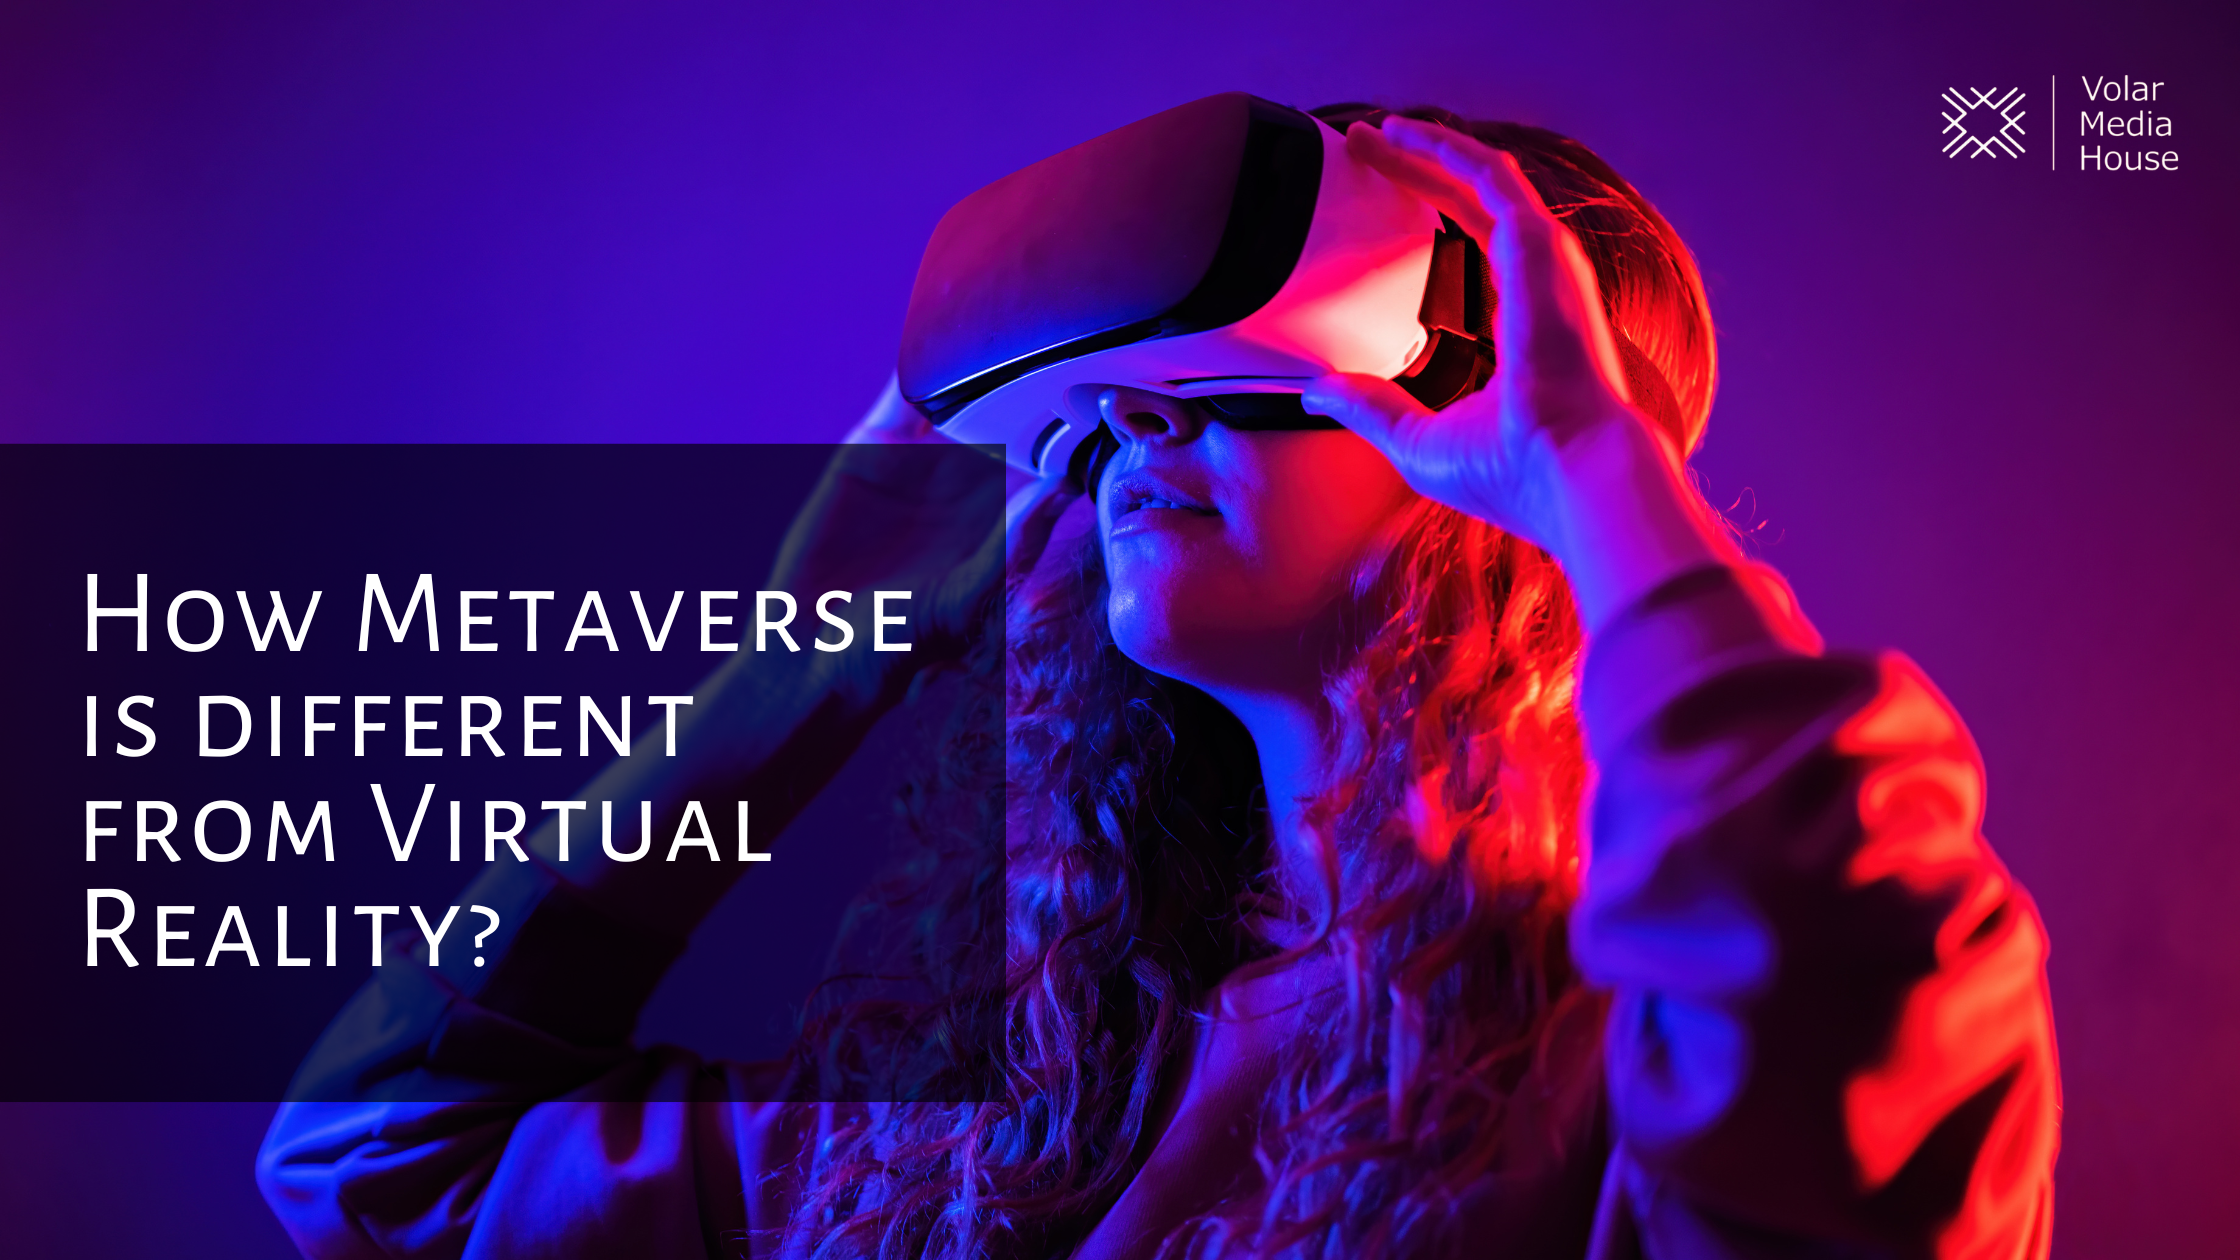 How is Metaverse different from Virtual reality?